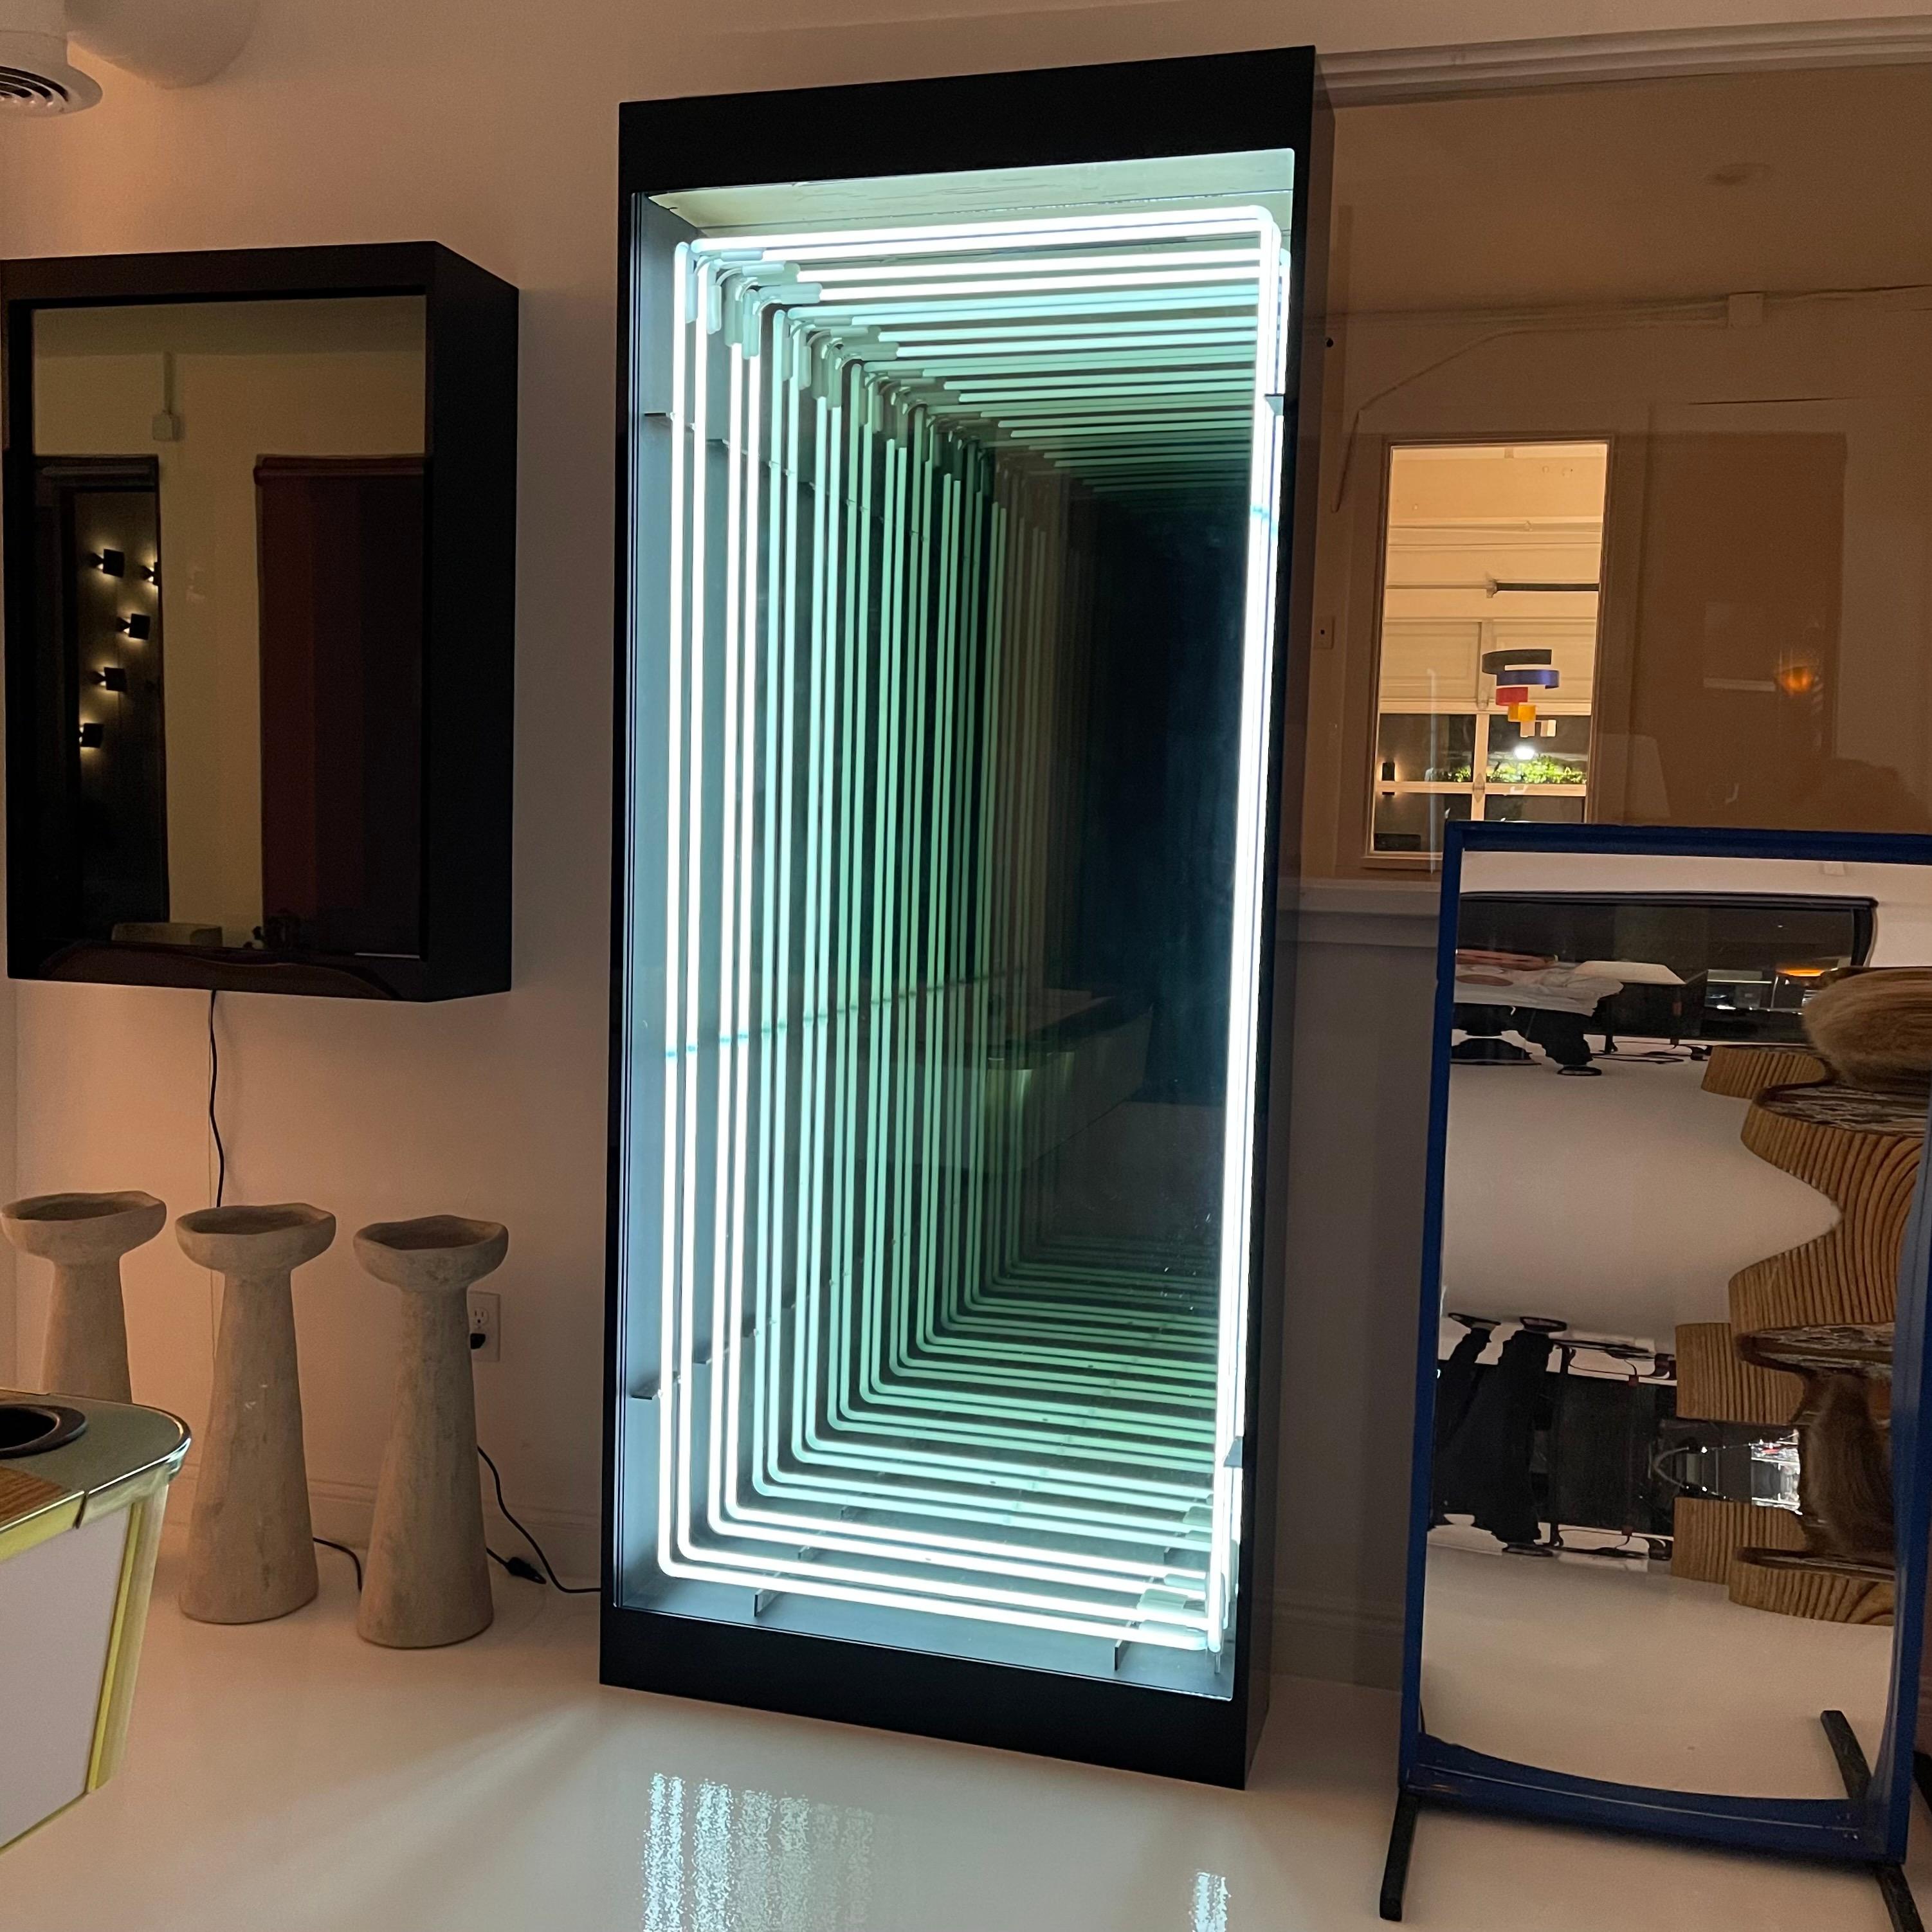 Monumental neon and plexiglass infinity mirror by Merit. Handmade in Los Angeles. Incredible presence with two white neon rings that reflect deep into the mirror. Great illusion. All encased in black plexiglass. Looks great during the day and even